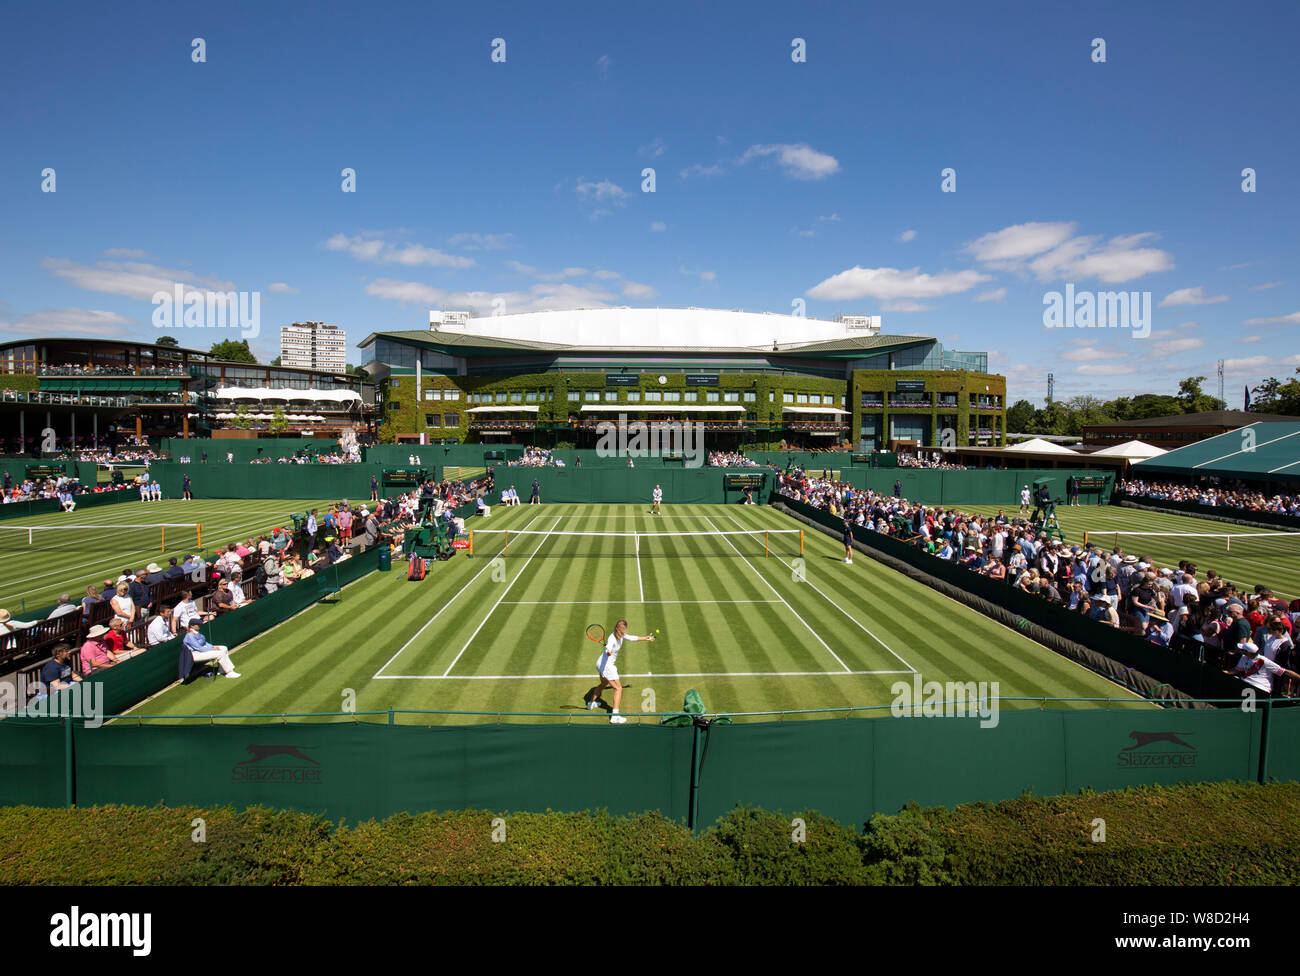 Panoramic view of outside courts with Centre Court building in the background, 2019 Wimbledon Championships, London, England, United Kingdom. Stock Photo